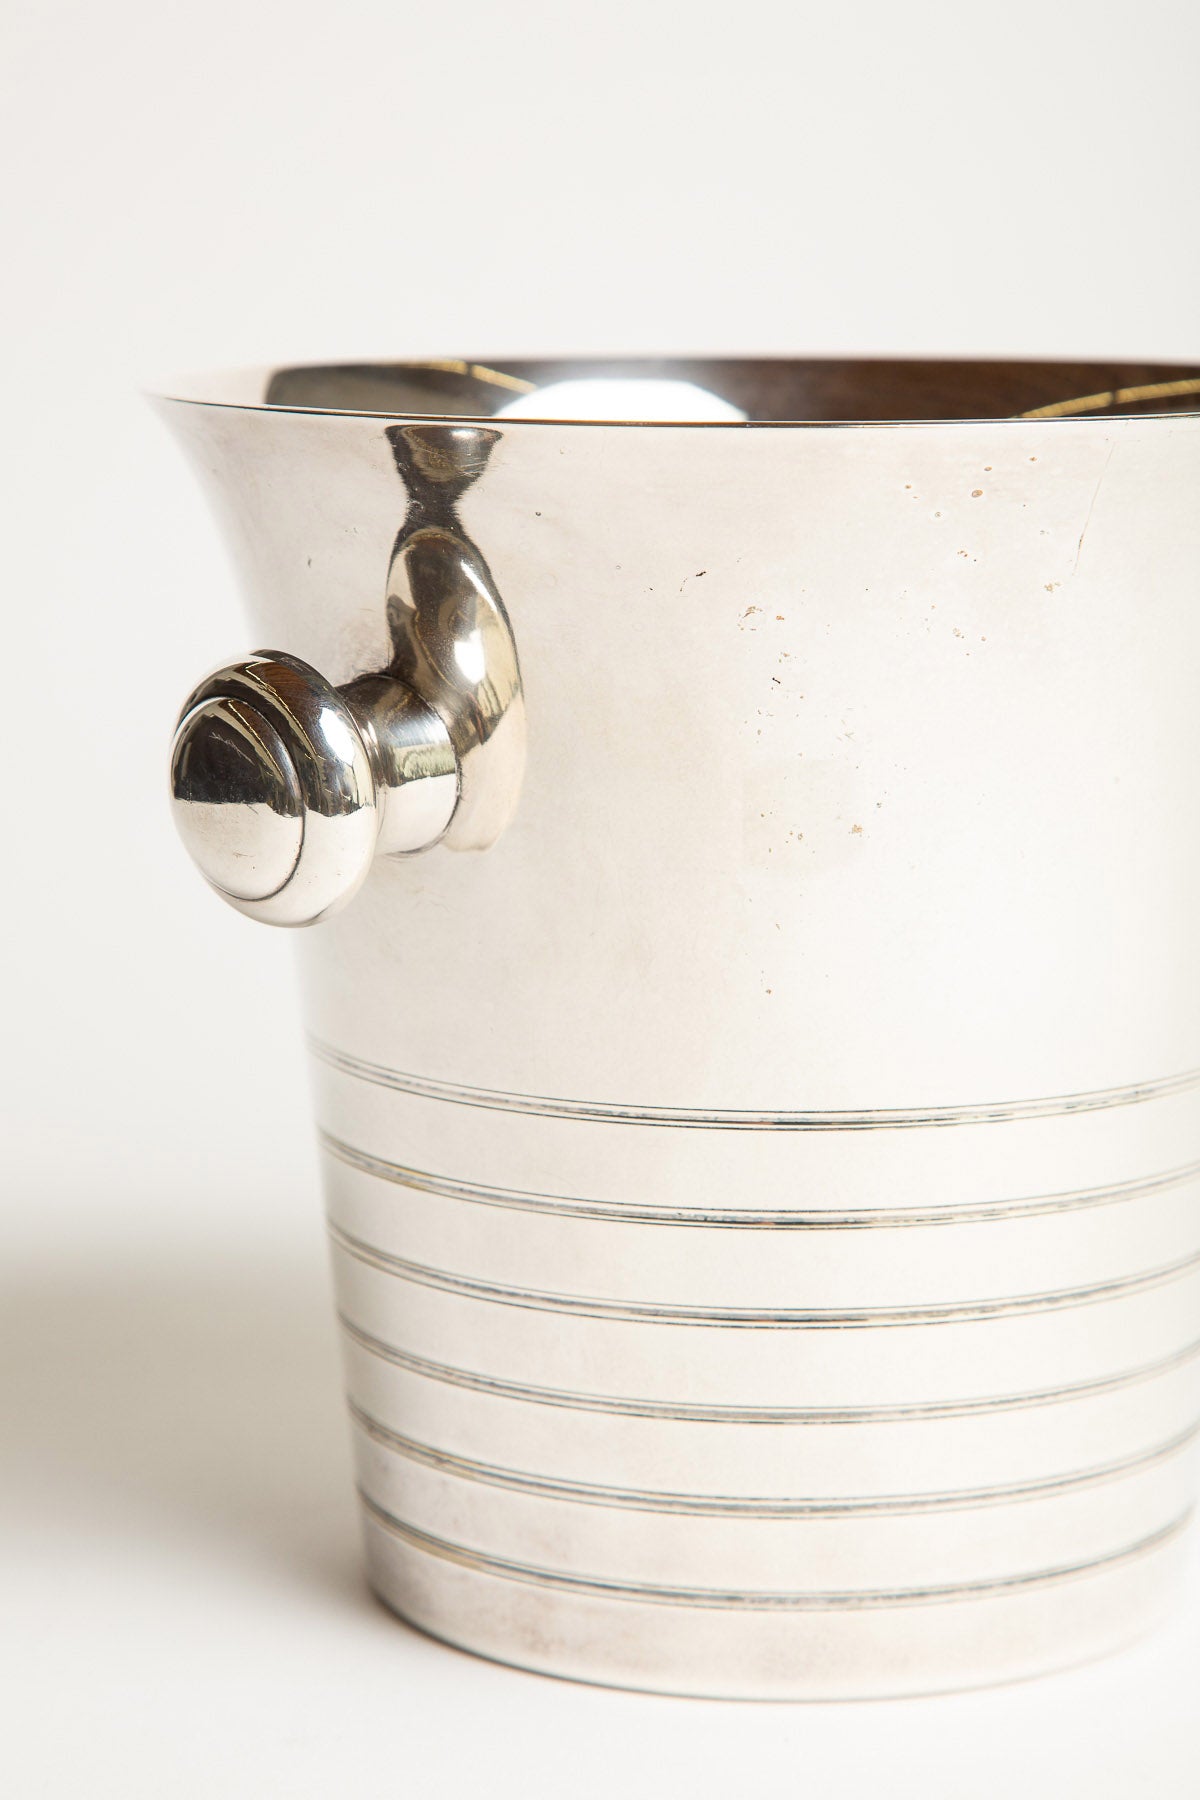 MAXFIELD PRIVATE COLLECTION | ICE BUCKET